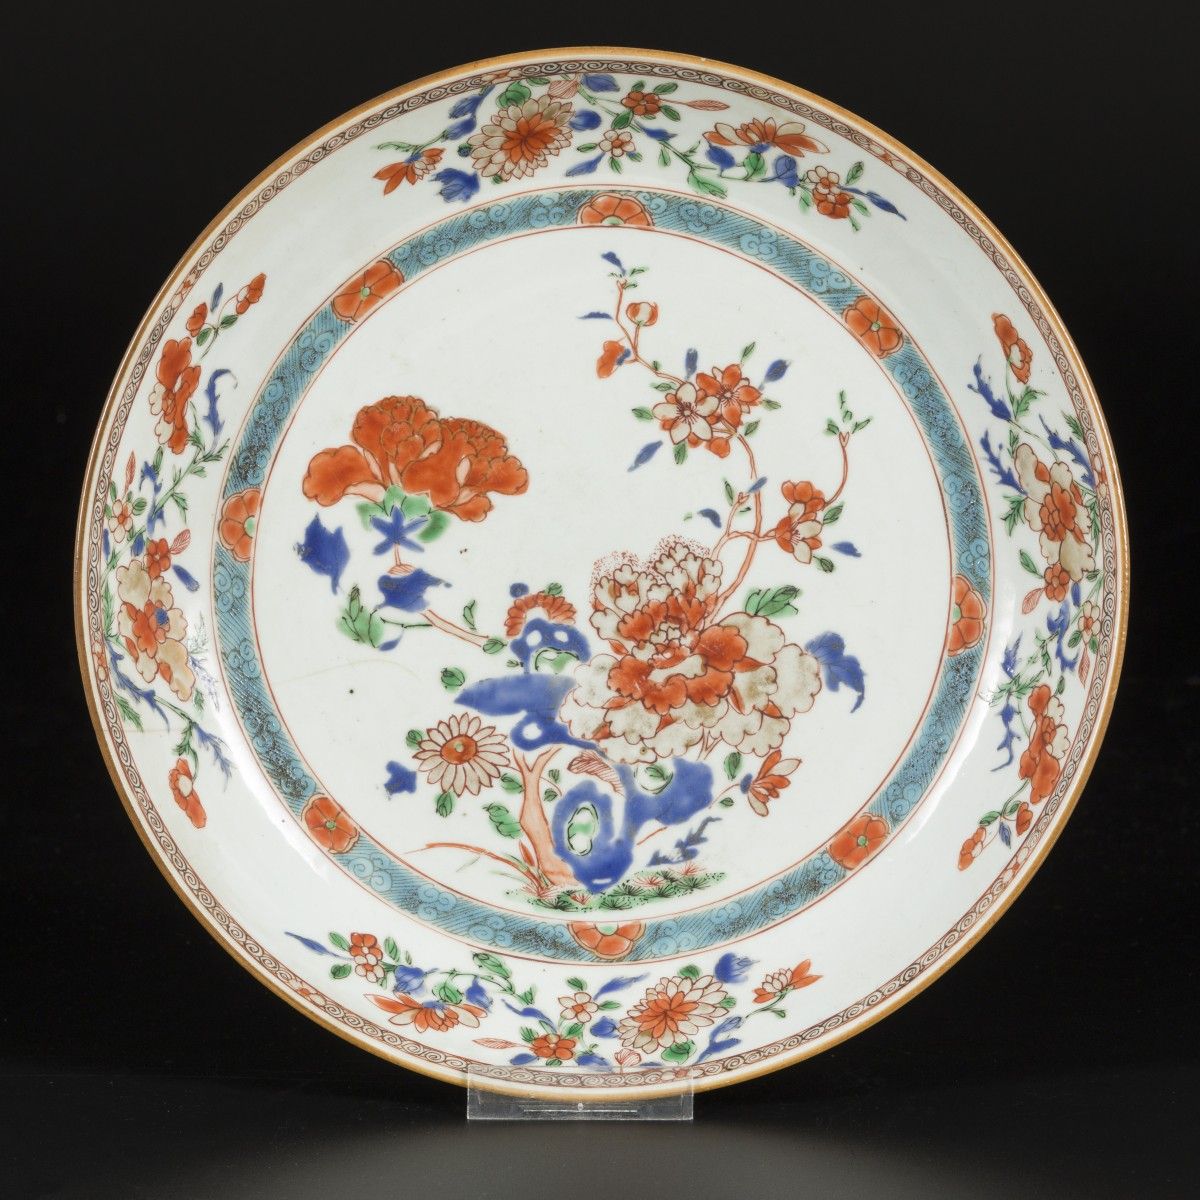 A porcelain charger with floral decorations, China, 18th century. Diam. 28 cm. H&hellip;